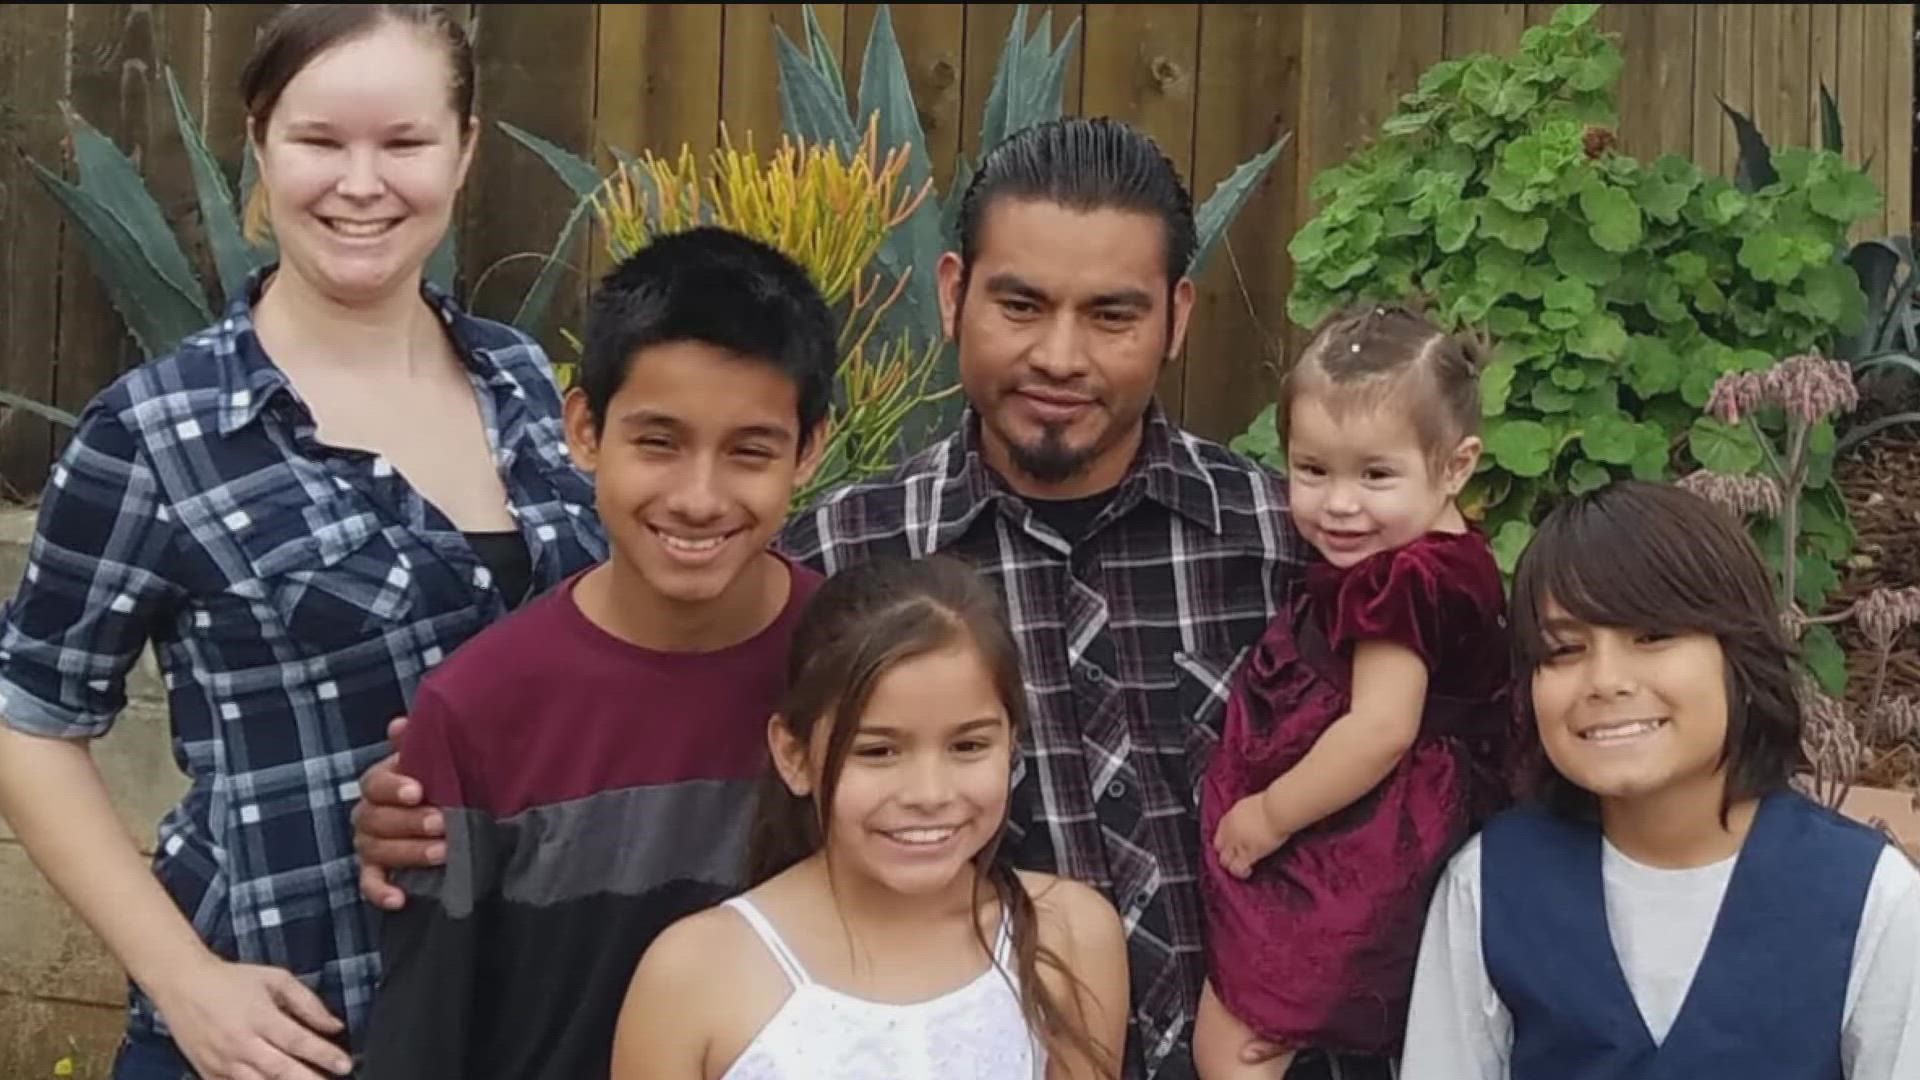 Delfino Gonzalez was killed on Interstate 15 on Sept. 18, by a drunk driver. Now, his family is on the verge of being evicted, struggling to make ends meet.